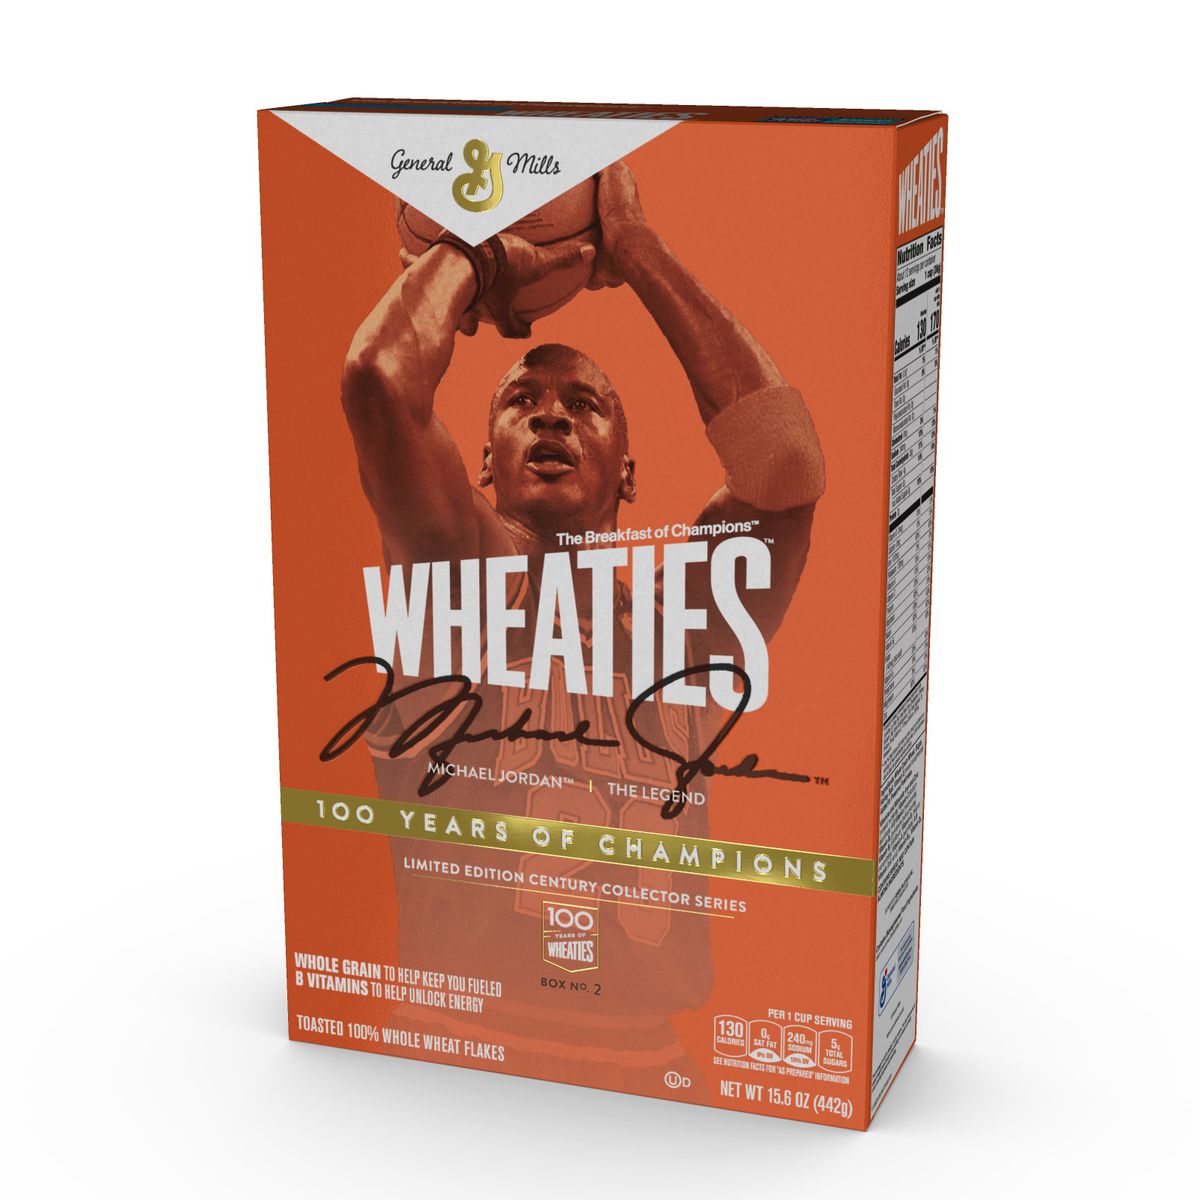 The limited-edition Wheaties Michael Jordan Gold Foil Box is available online. 